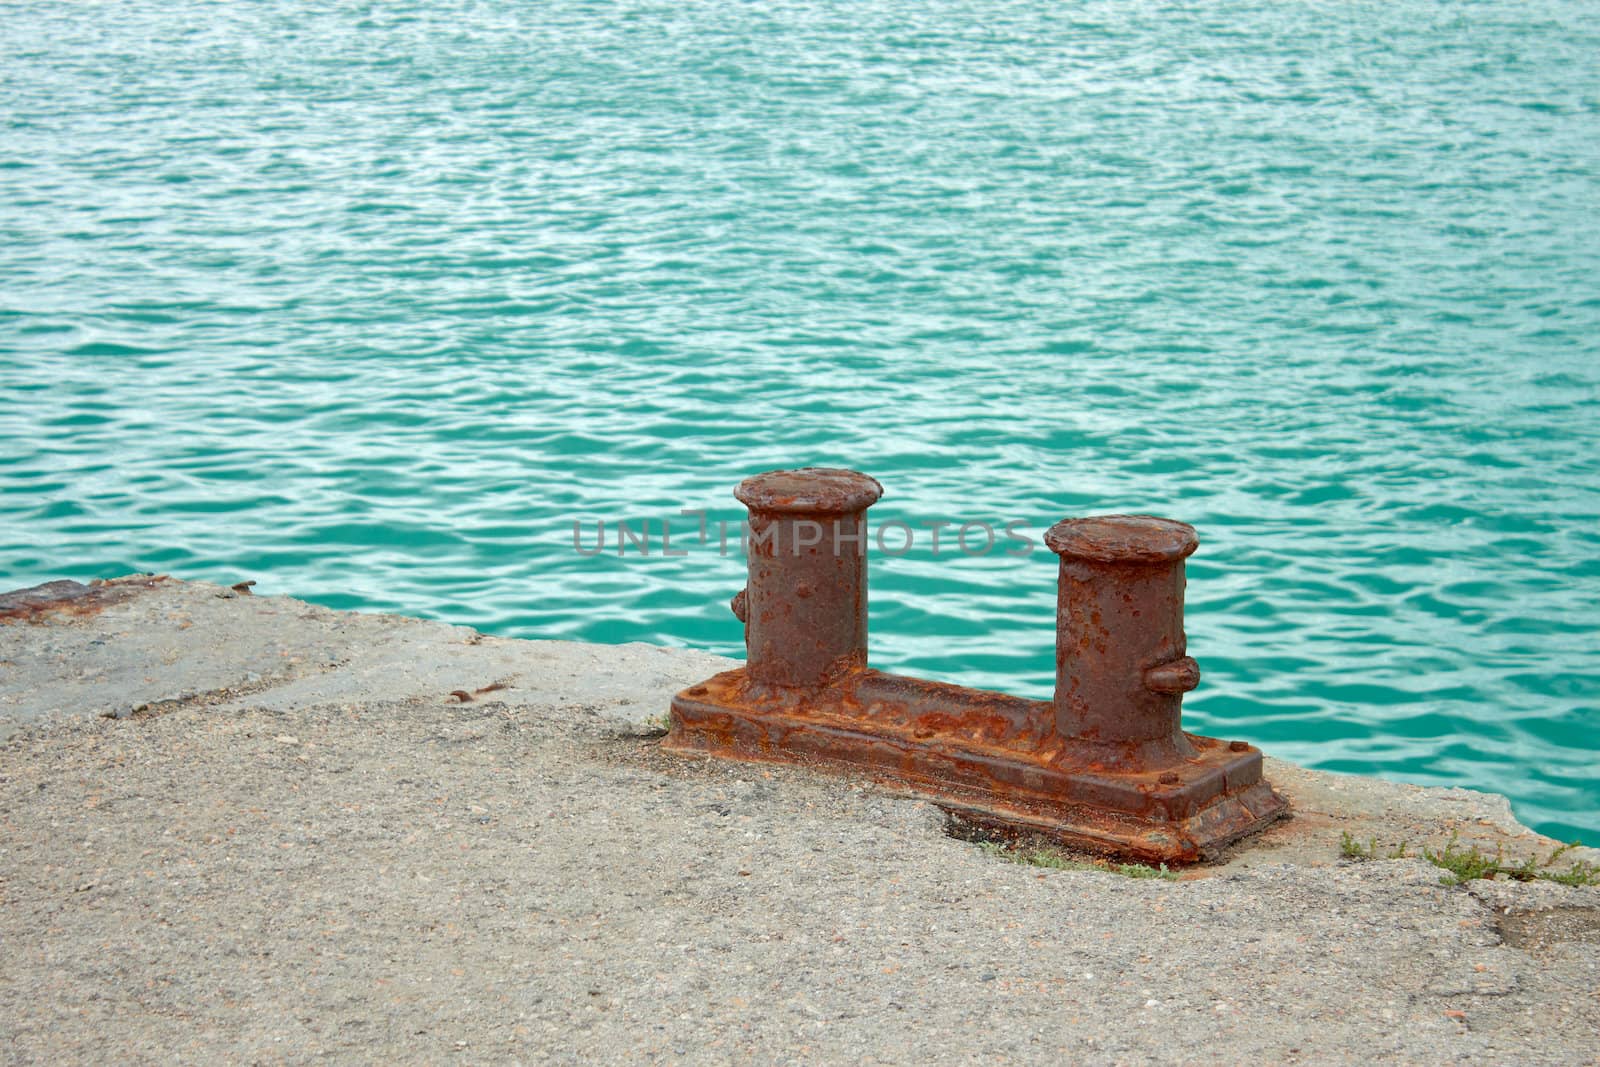 Steel rusty dual mooring bitt on a fragment of old concrete pier on the background turquoise sea water